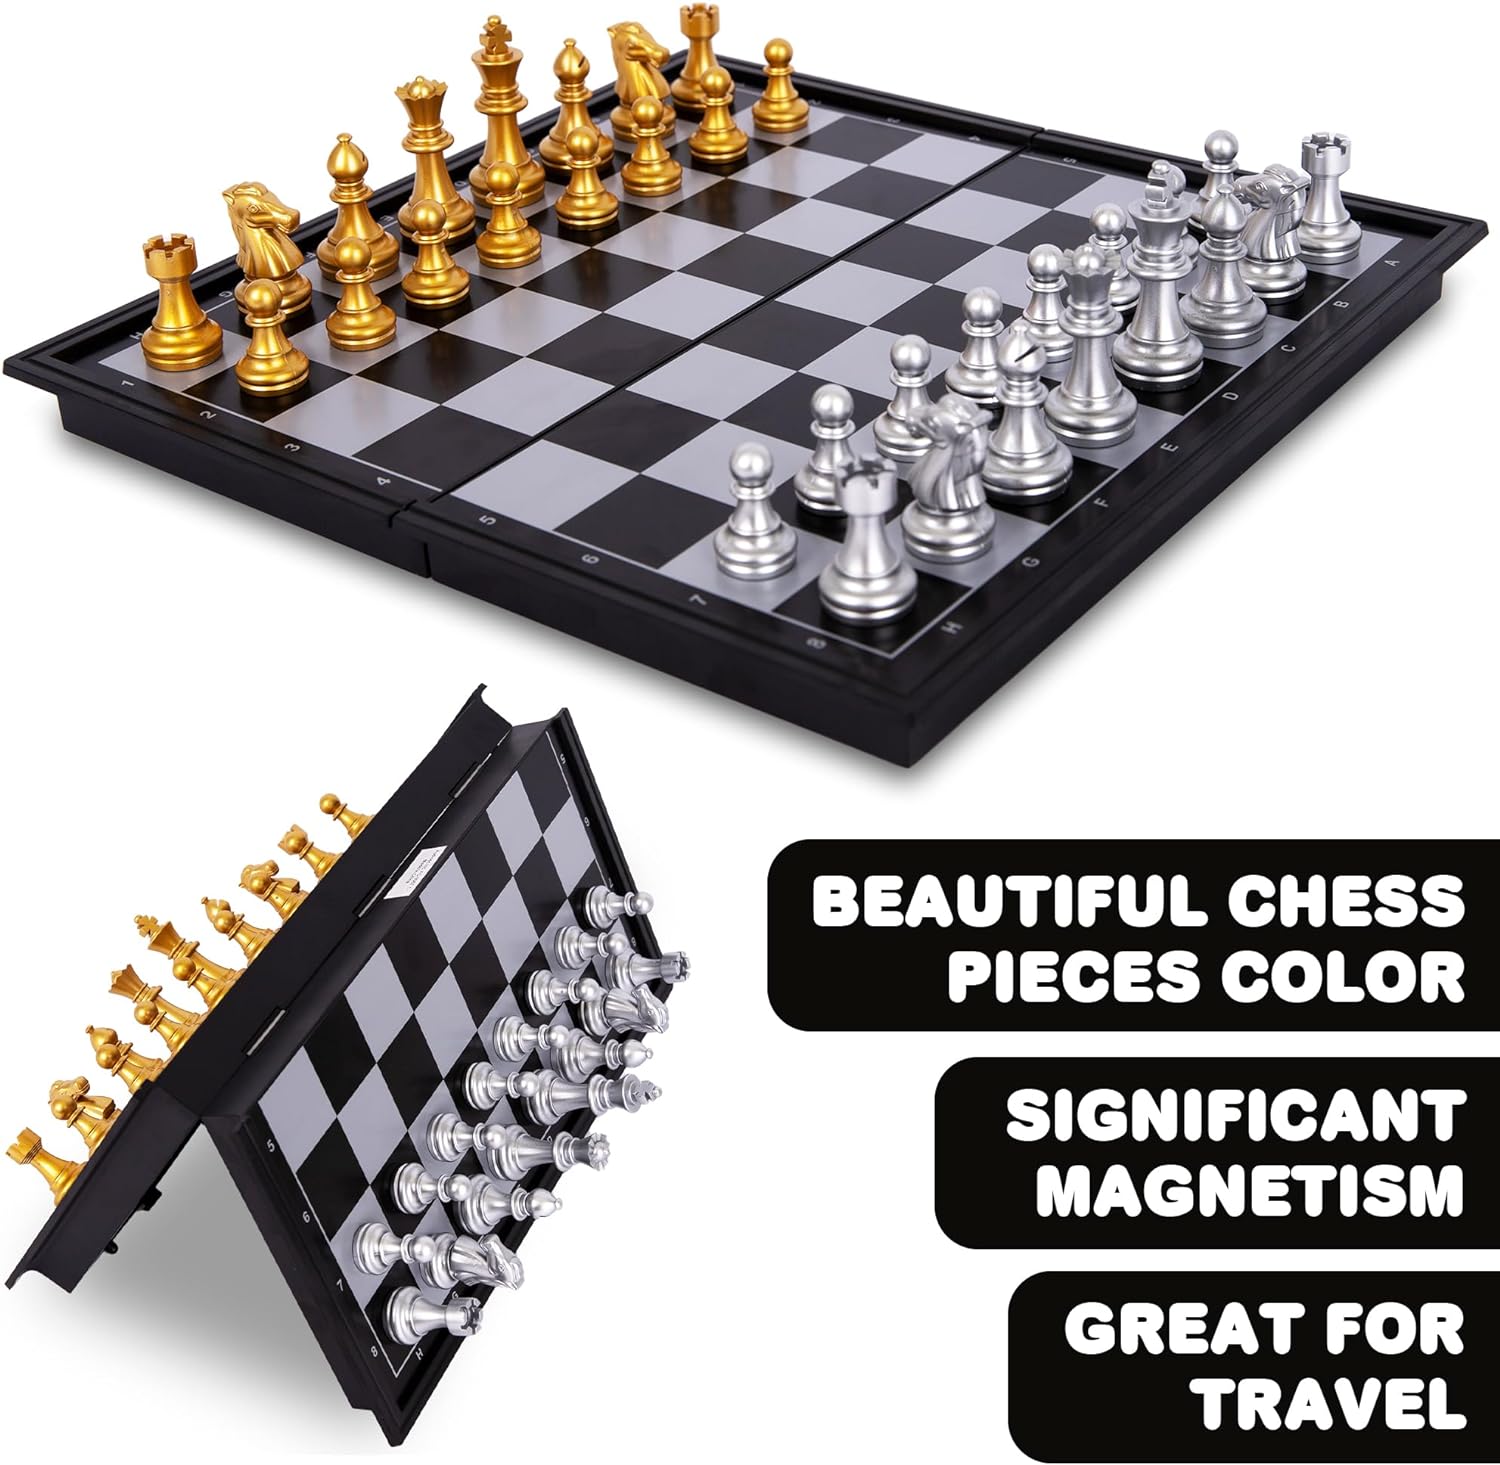 3 in 1 Magnetic Travel Chess Set - Portable Chess, Checkers, Backgammon Set - 9 Inch Magnetic Chess Board for Road Trips